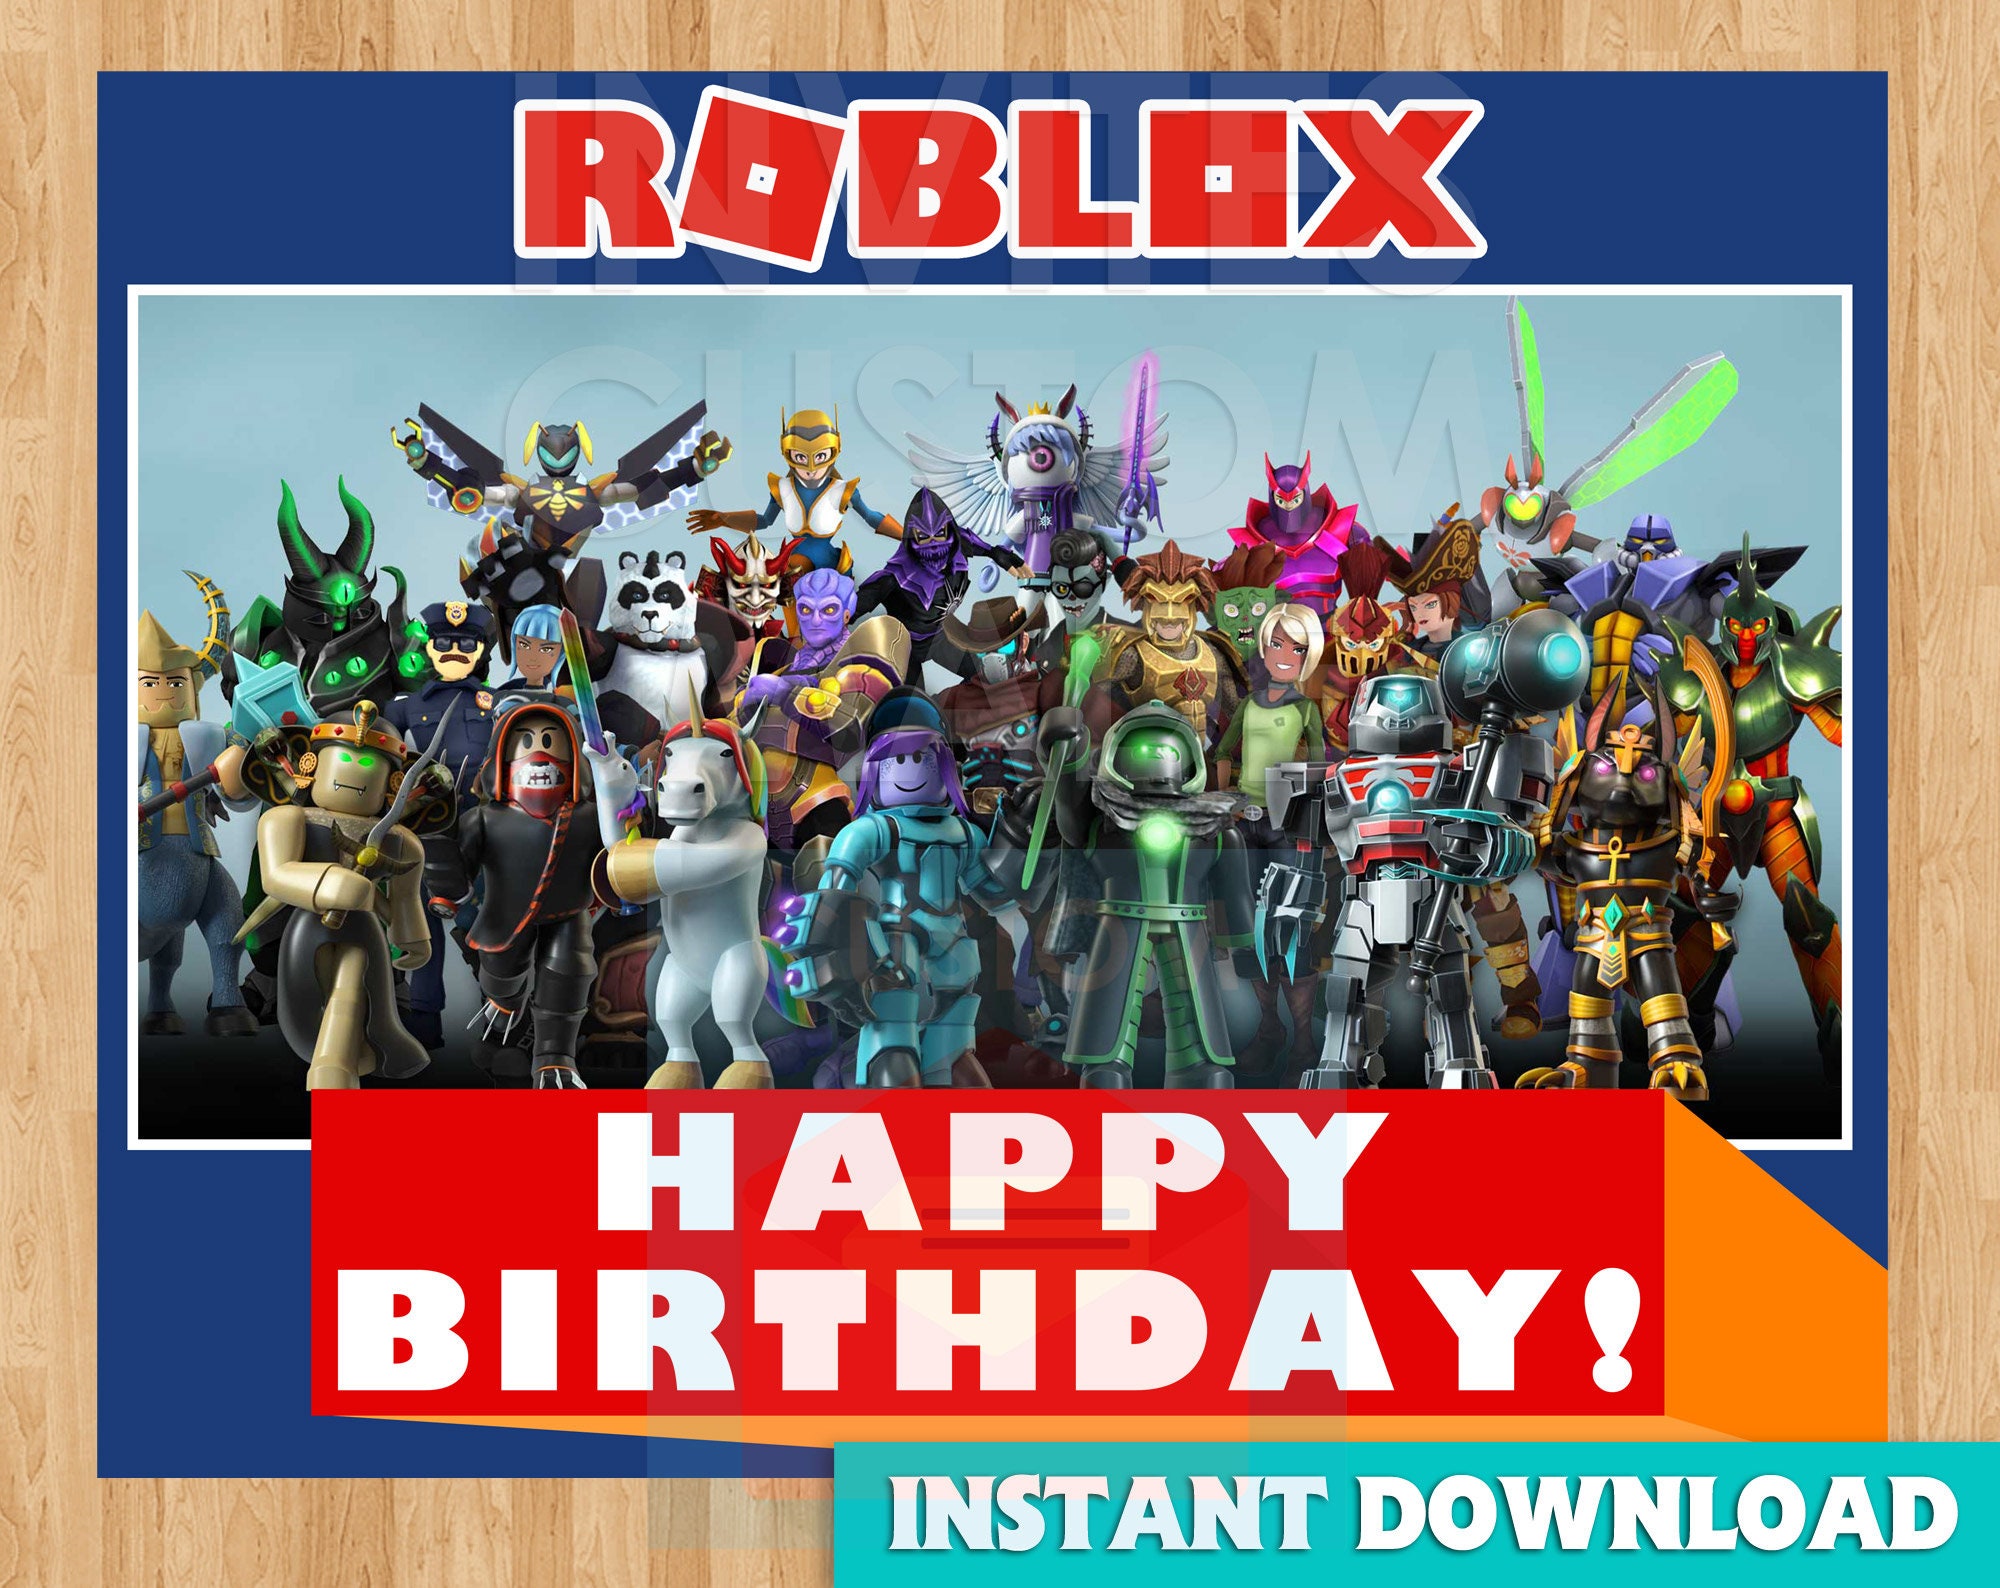 Roblox Happy Birthday Sign Instant Download Roblox Birthday Etsy - roblox sign in game